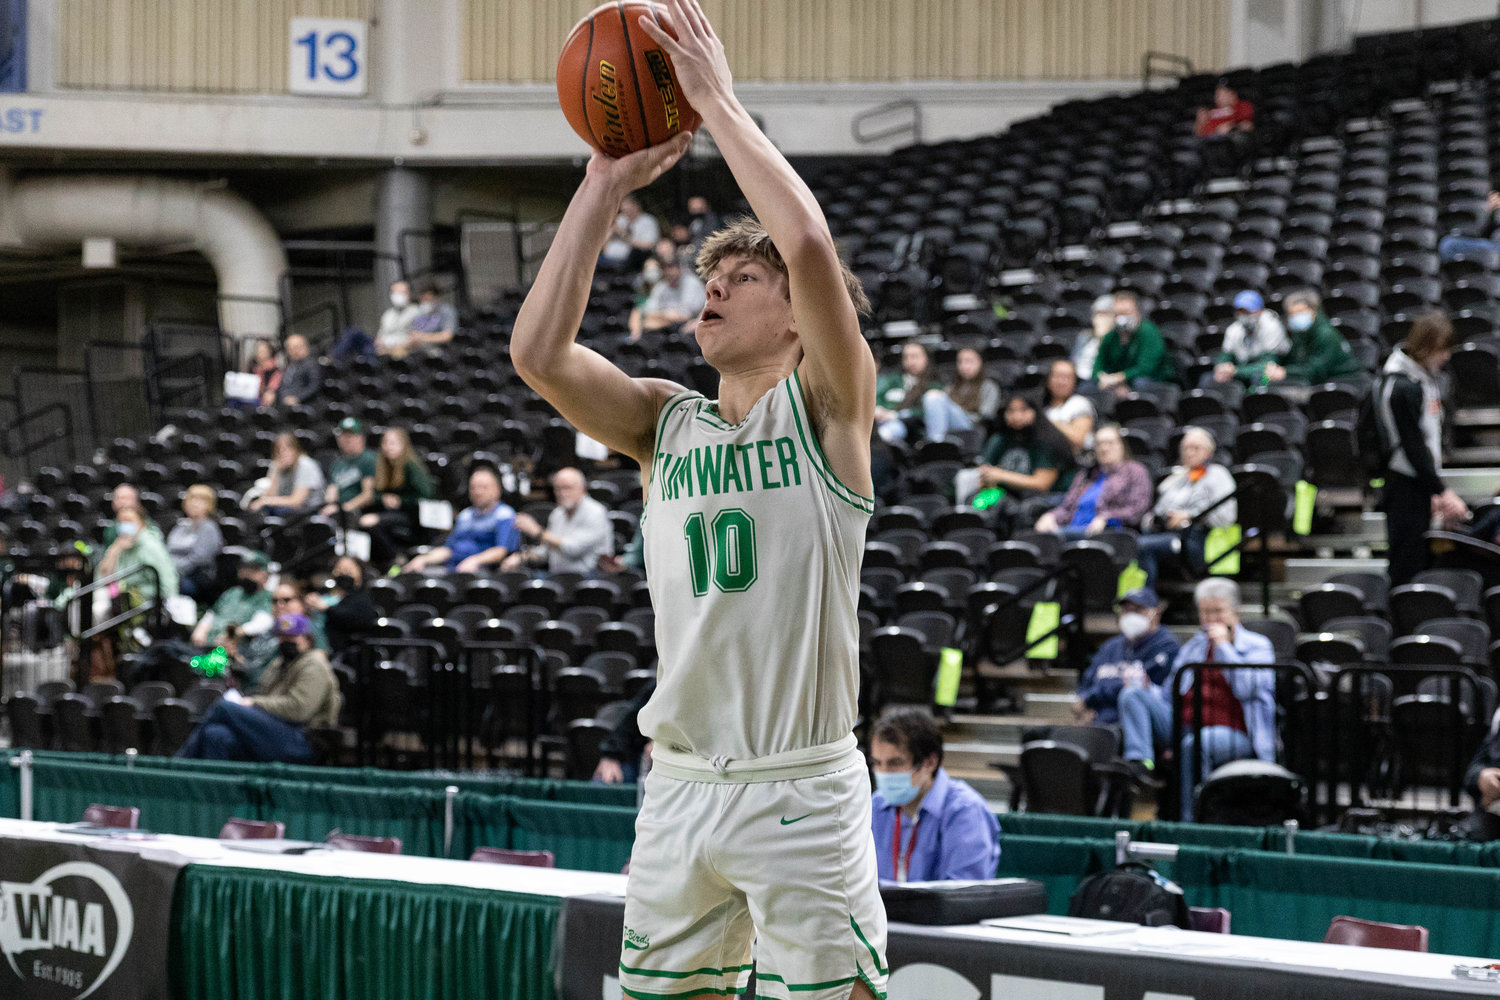 Tumwater guard Andrew Collins takes a 3-pointer against Port Angeles in the 2A State Fourth-Place game at the Yakima Valley SunDome March 5.